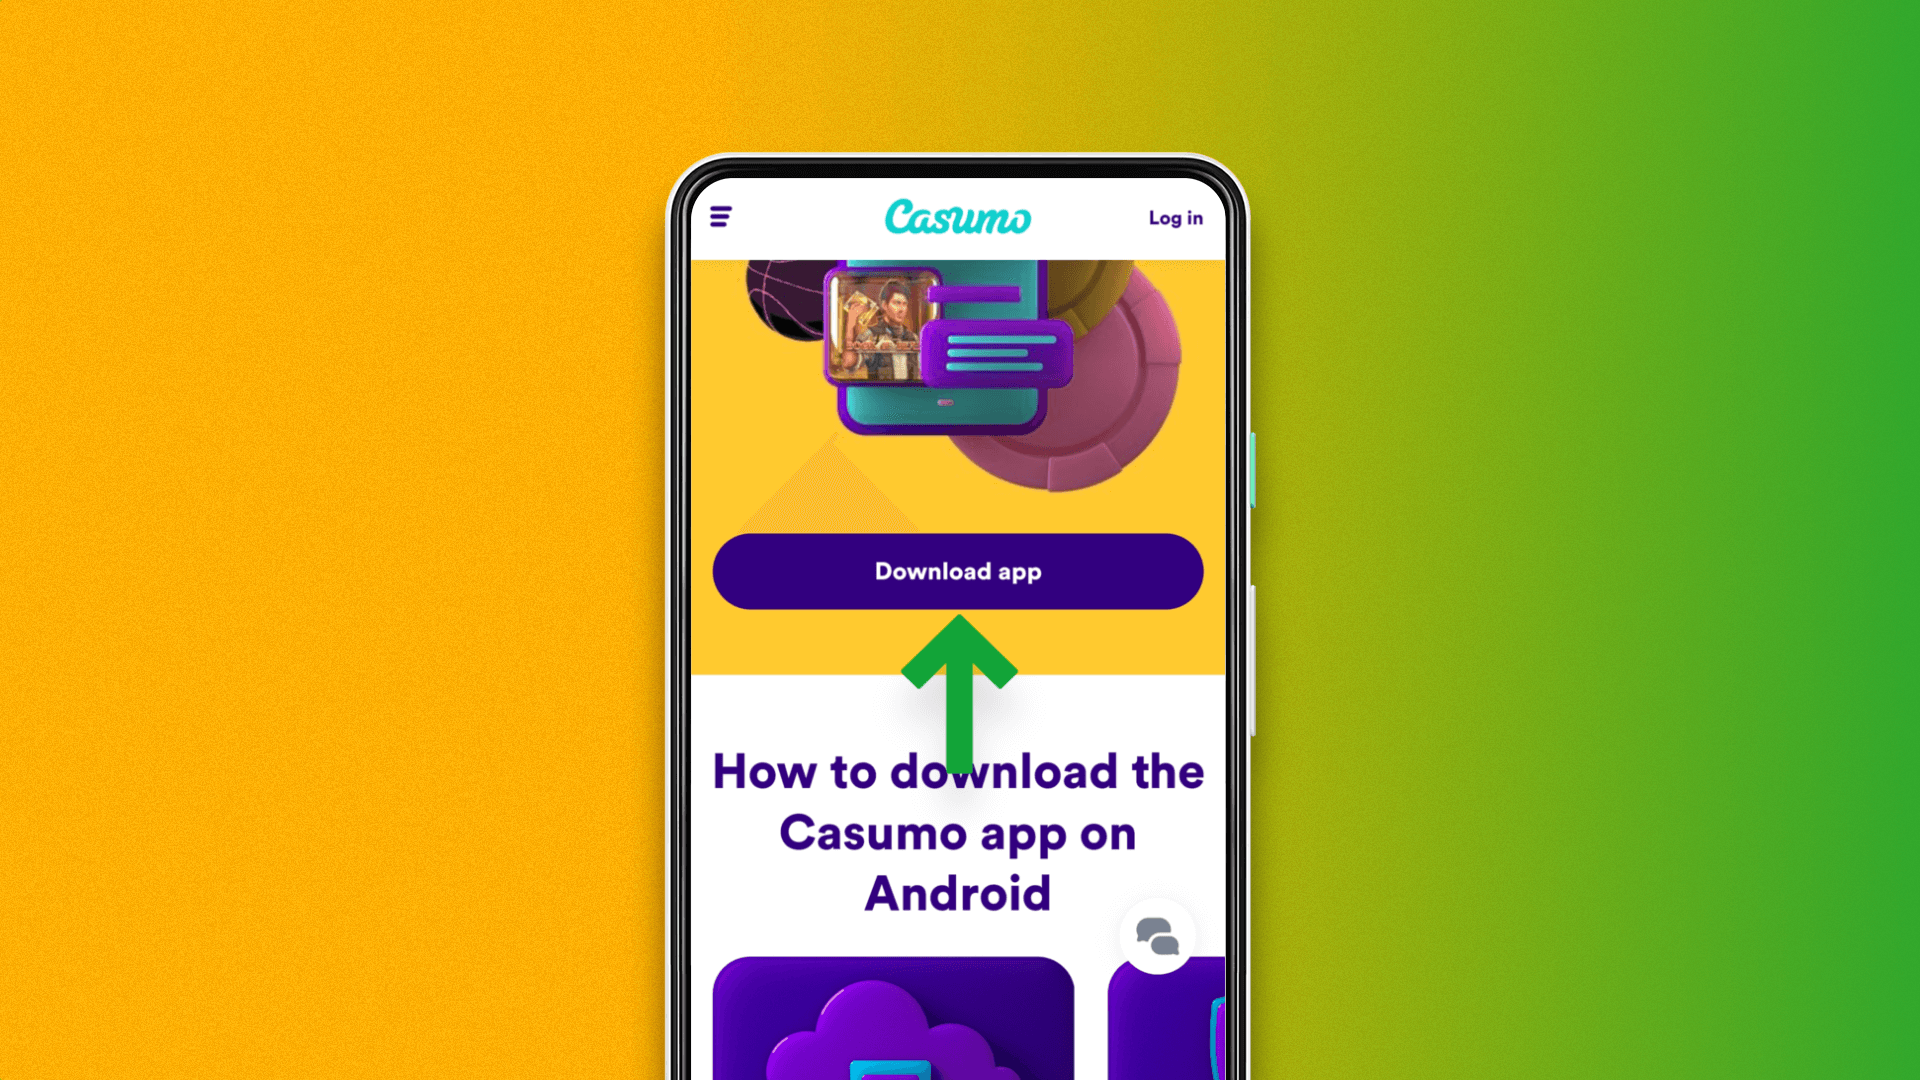 Button to download the Casumo app